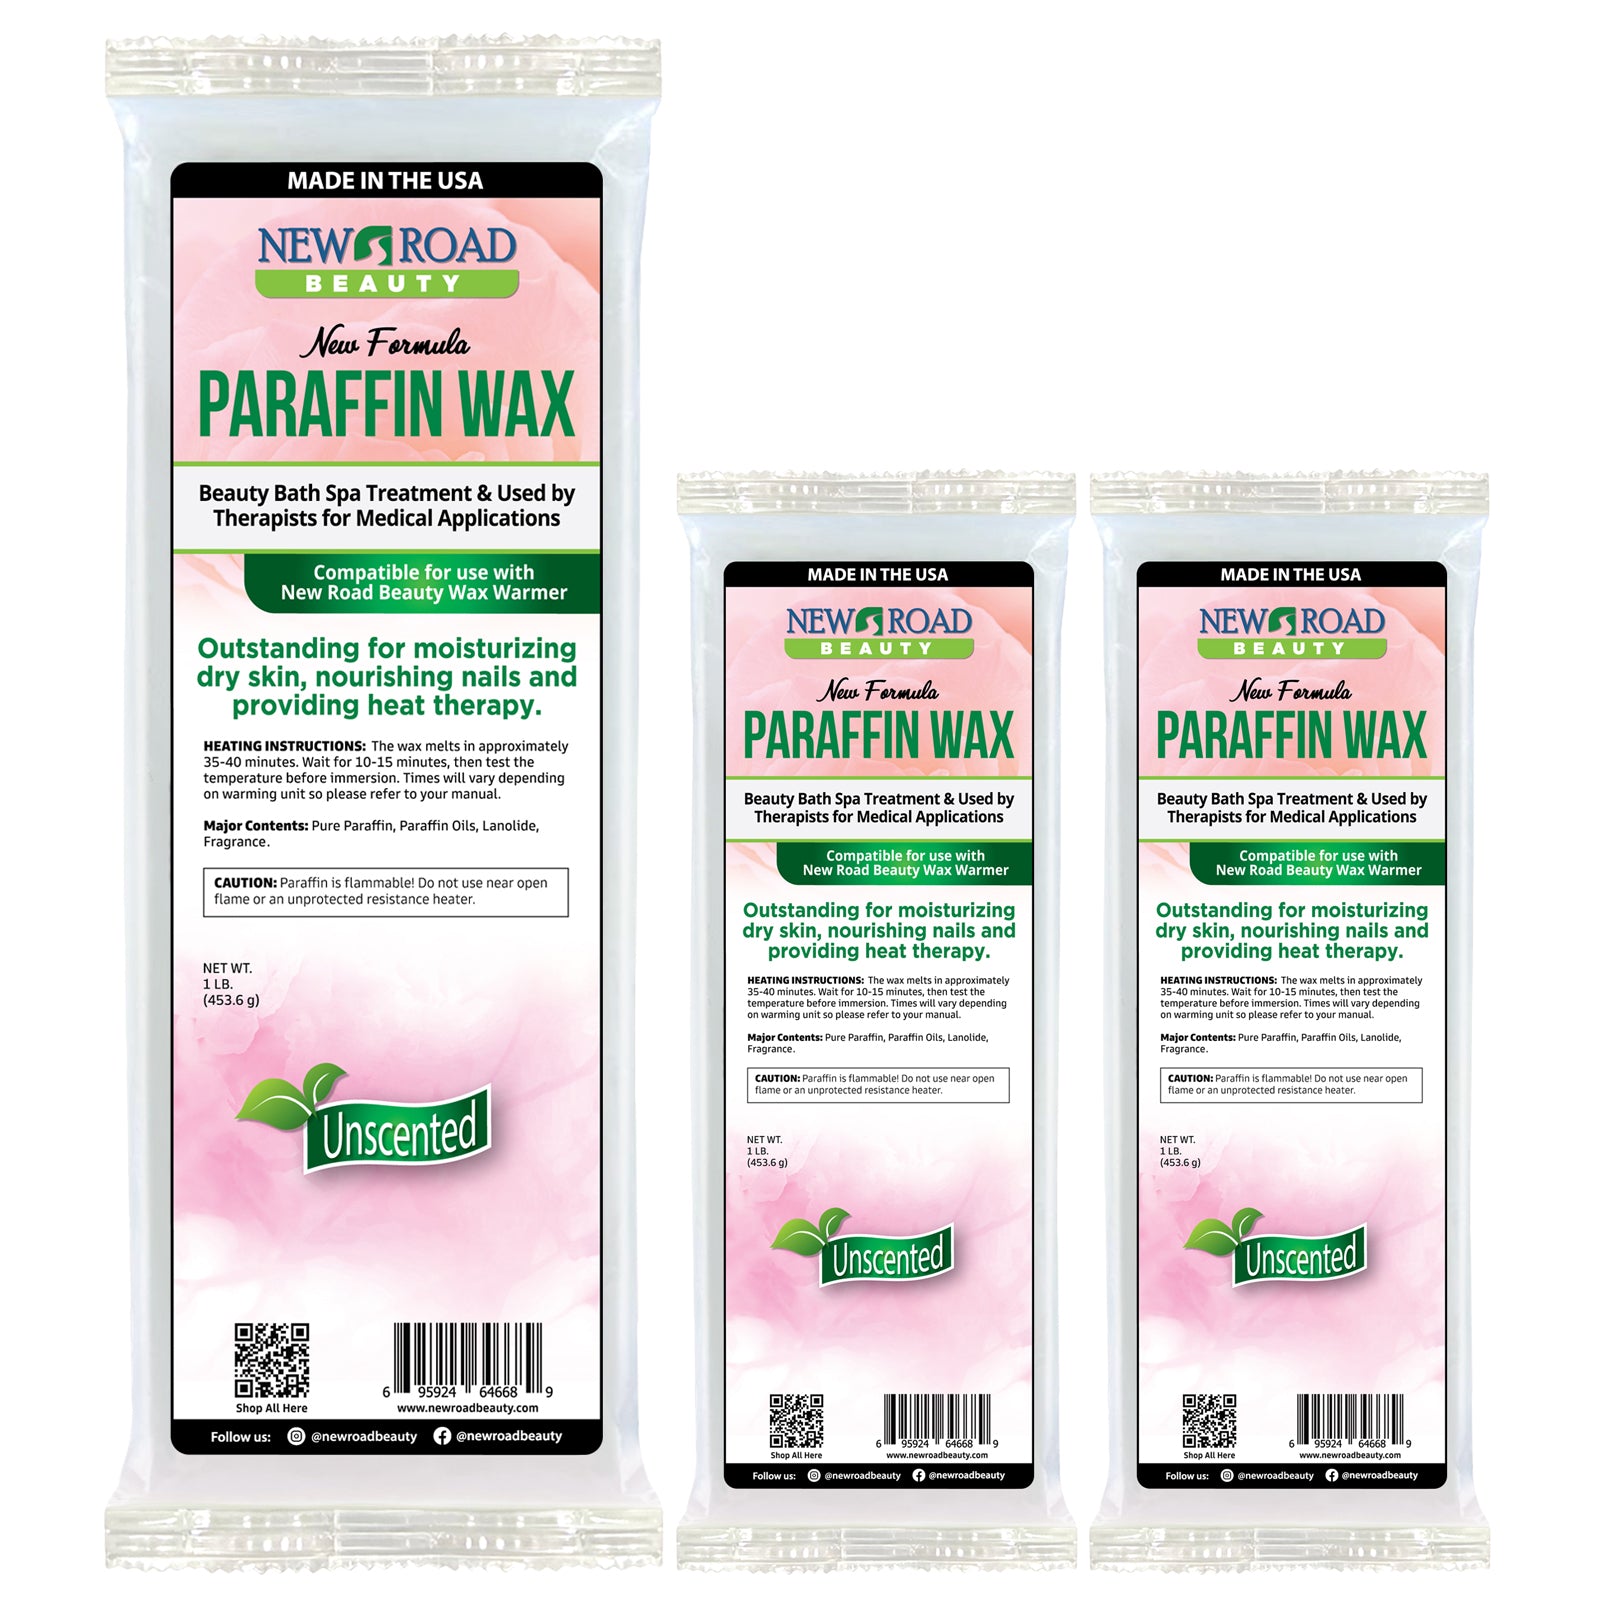 Beauty Room angel - PARAFFIN OF HANDS AND FEET Paraffin wax is a